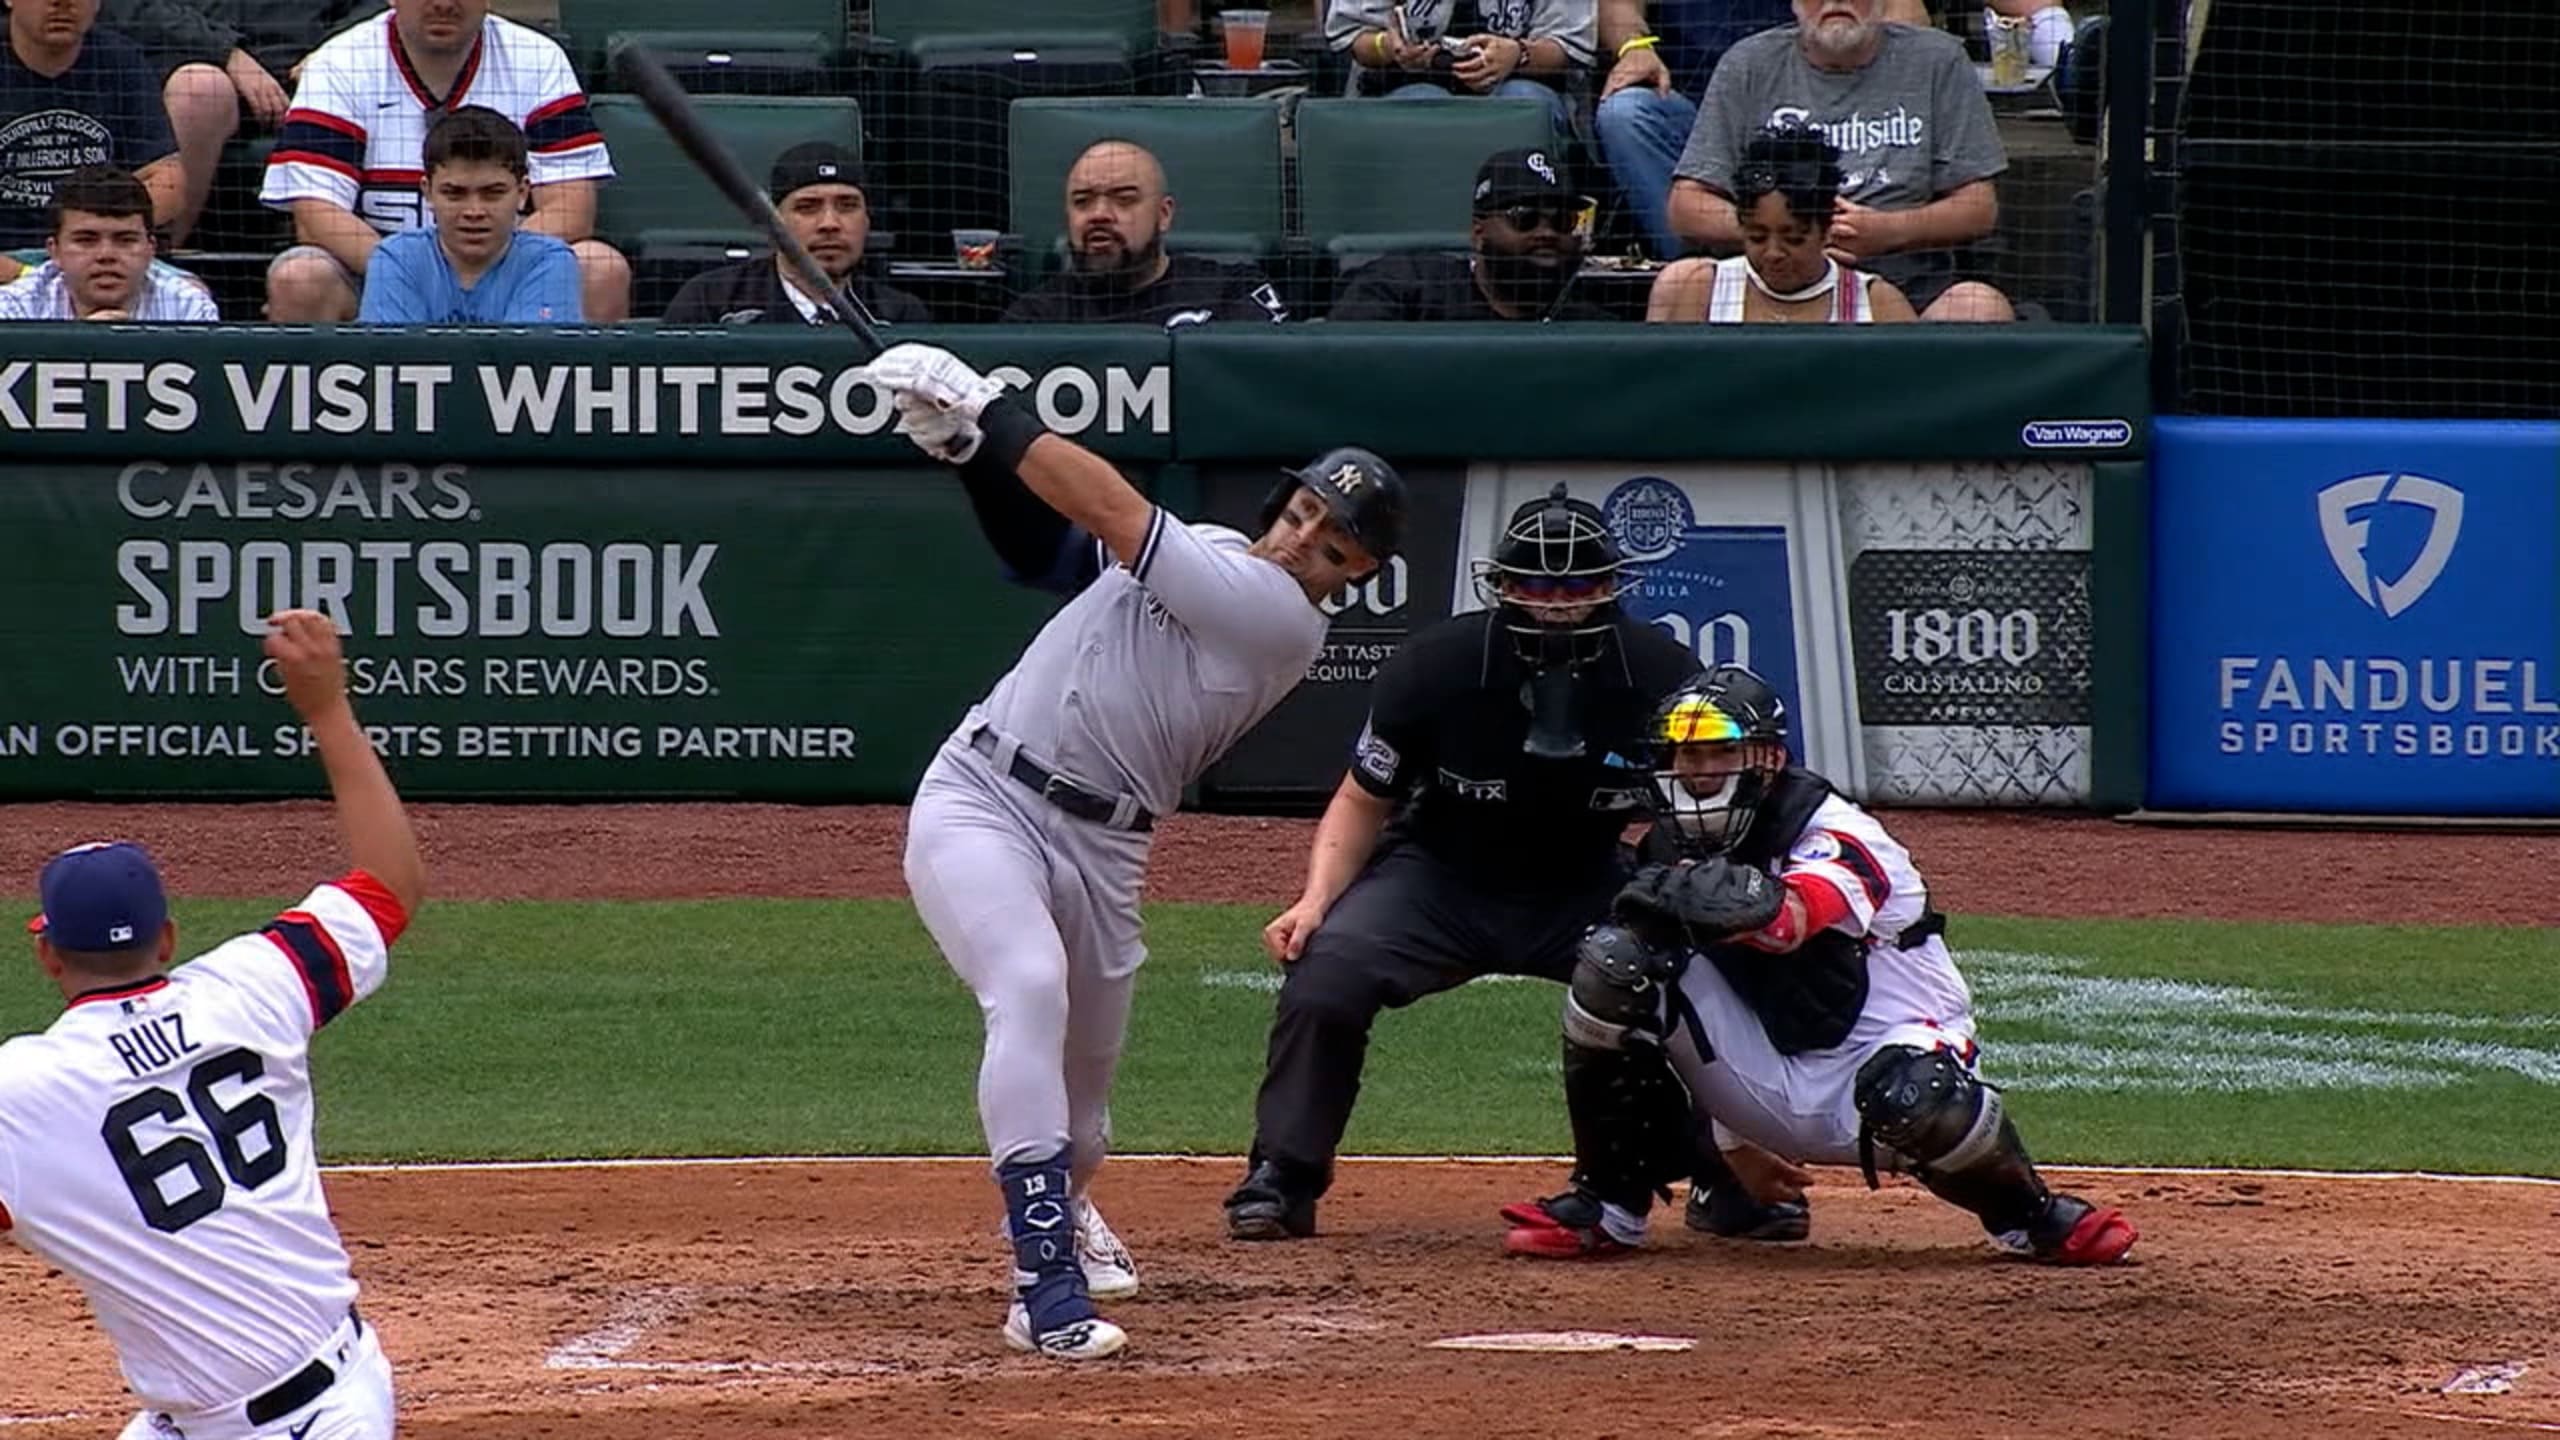 Cortes pitches 8 crisp innings as Yankees beat White Sox 5-1 – KGET 17